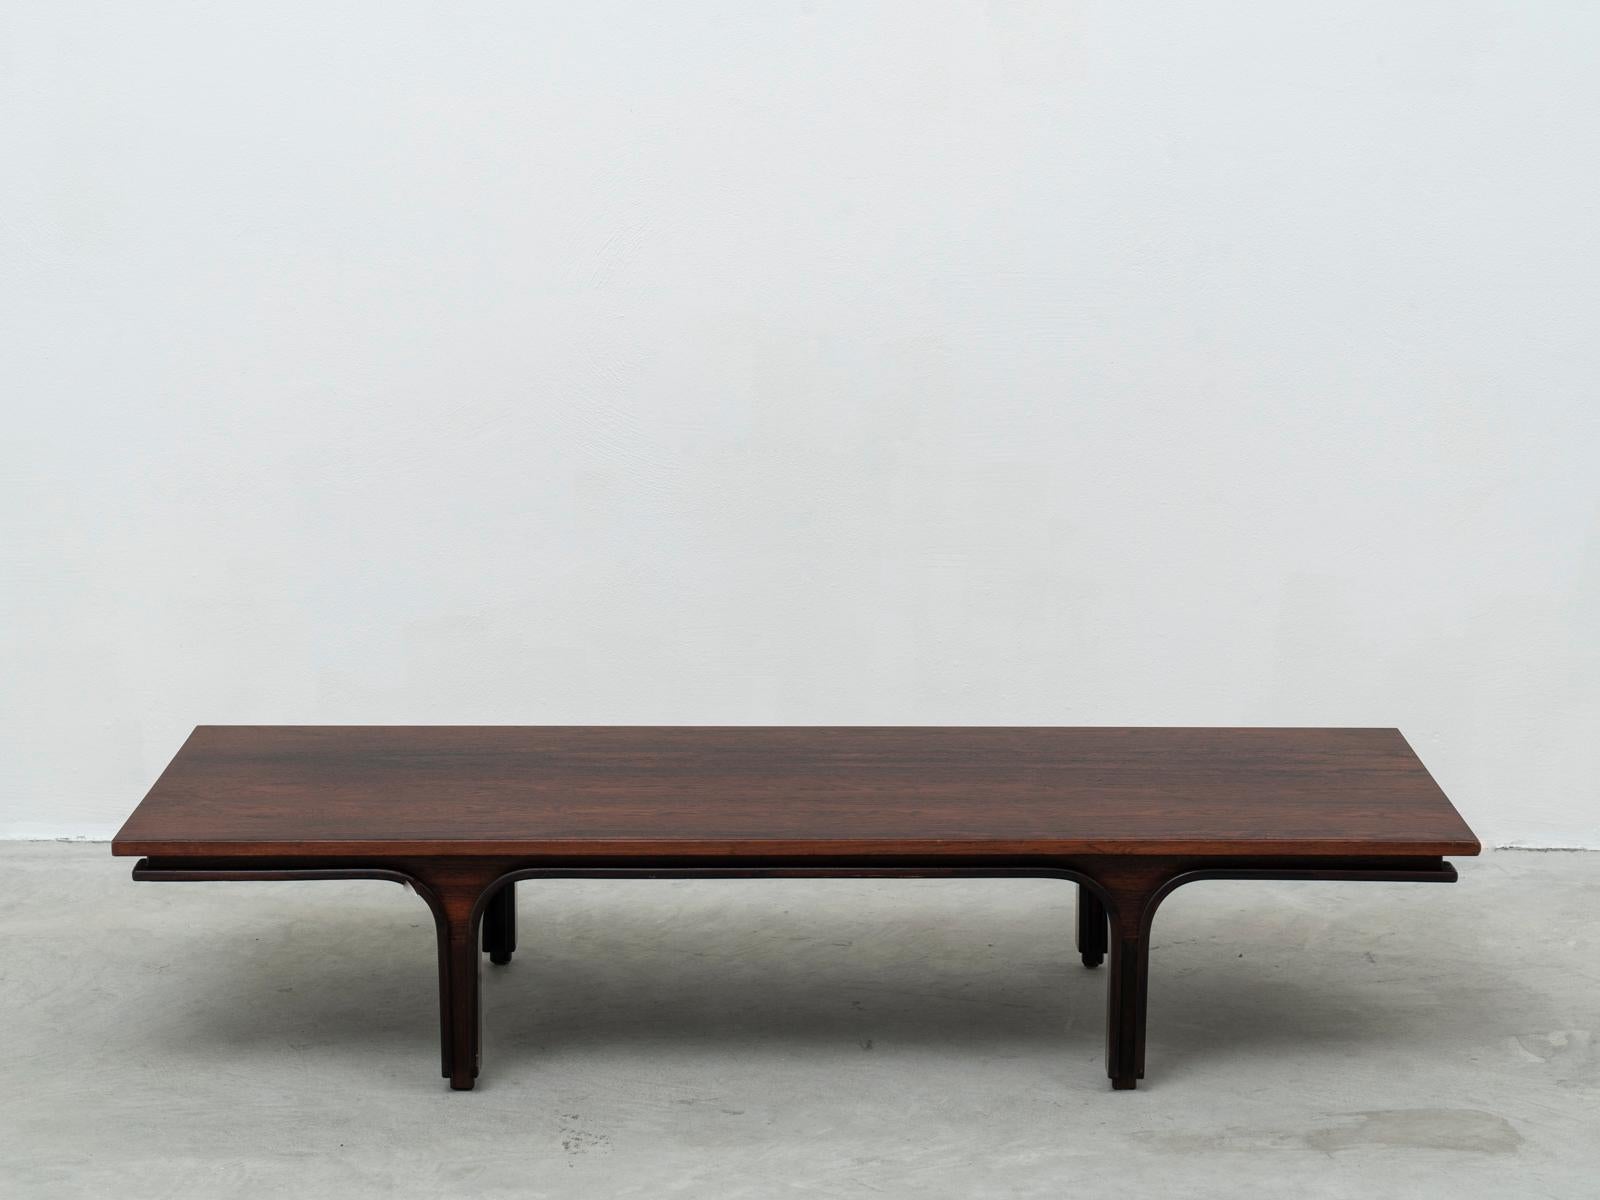 Ionic low table by Italian architect and designer Gianfranco Frattini, part of the series of furnishings that he creates for the Italian manufacturer Bernini from 1956. This piece is made of rosewood and still retains the original Bernini label, and